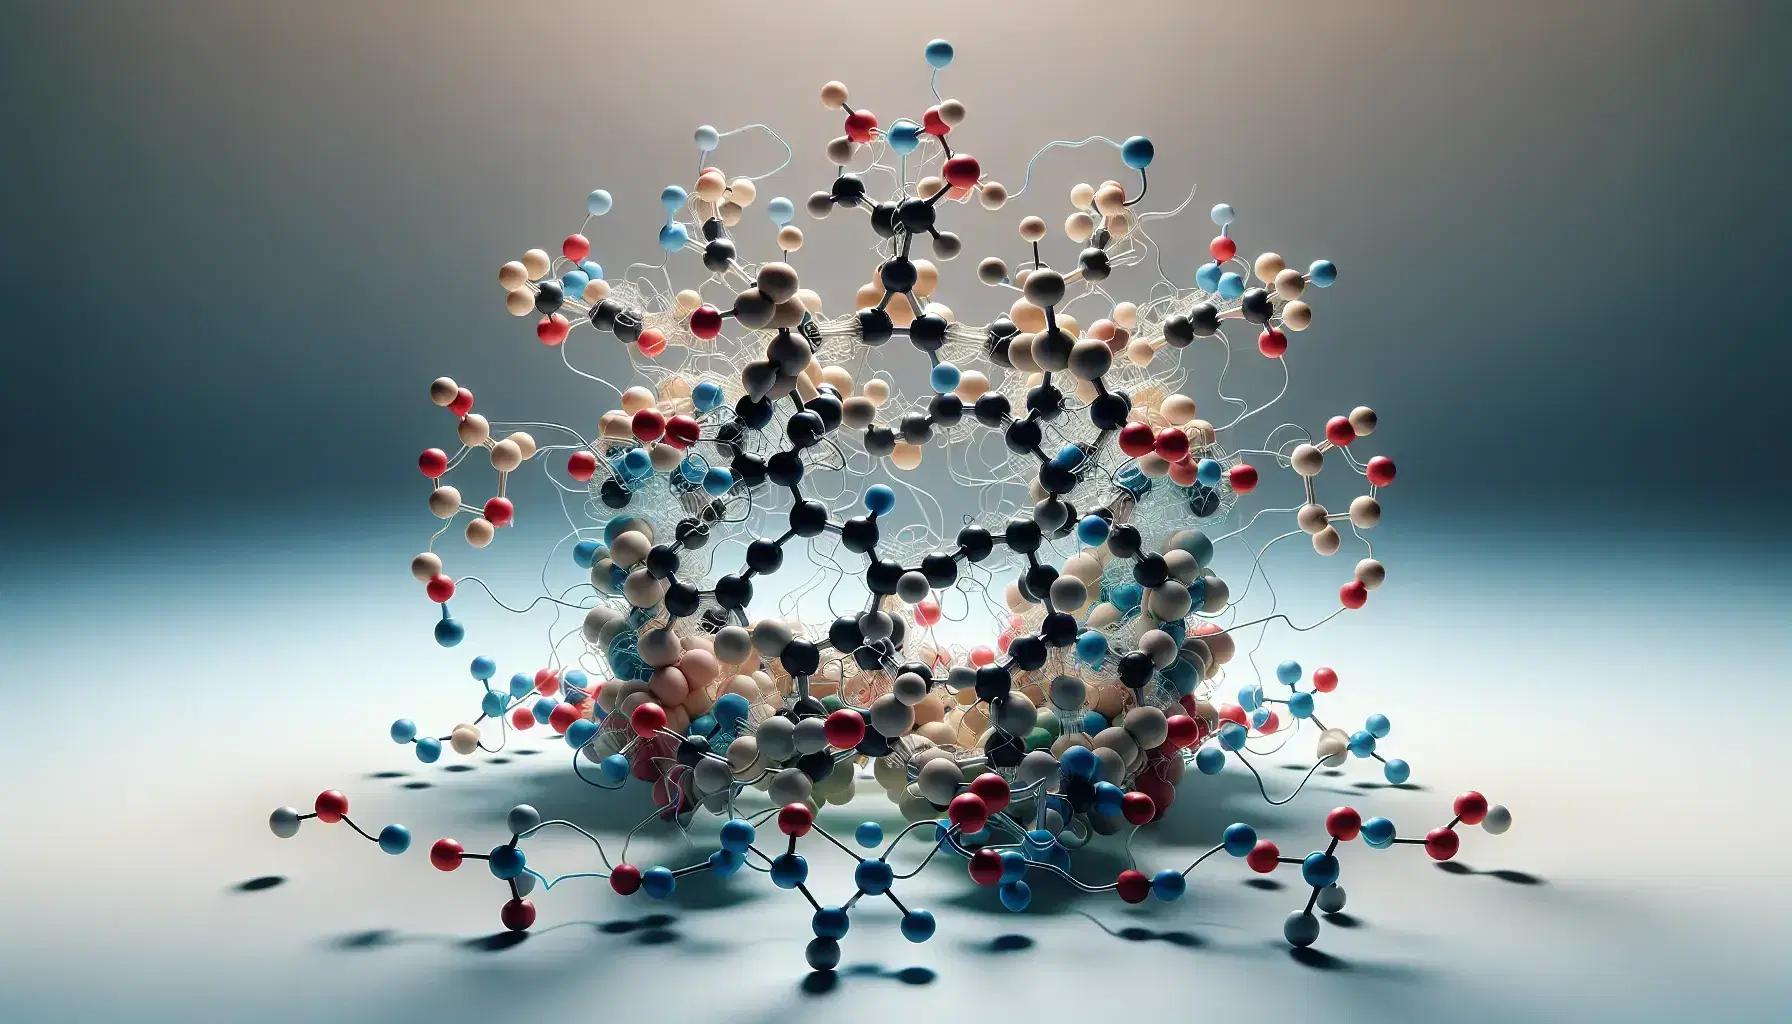 Three-dimensional molecular model of a protein complex of the MAPK signaling pathway with colored spheres for atoms and sticks for bonds.